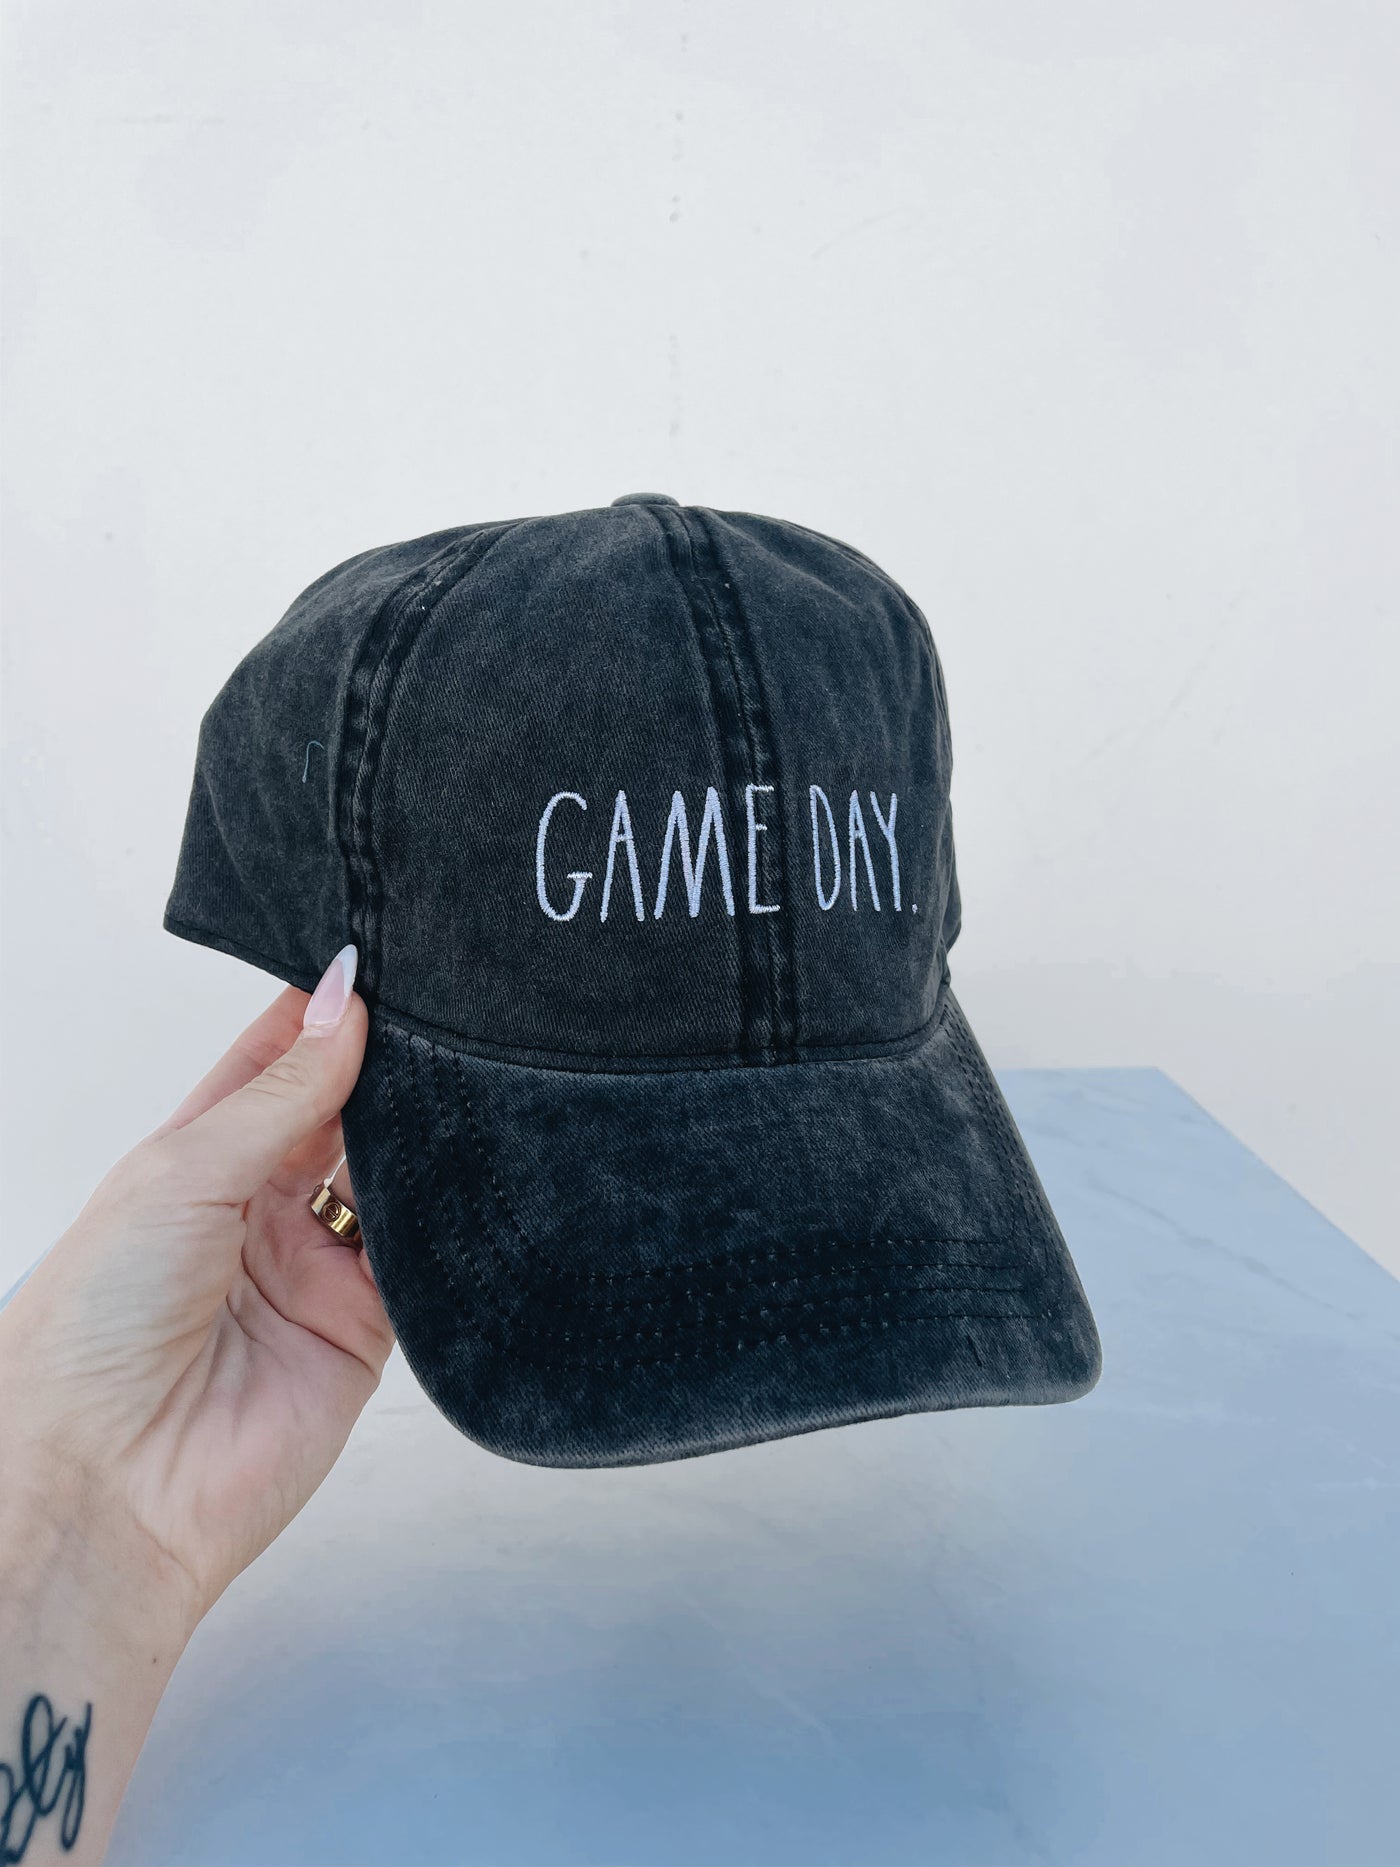 Rae Dunn Game Day - Embroidered Hat